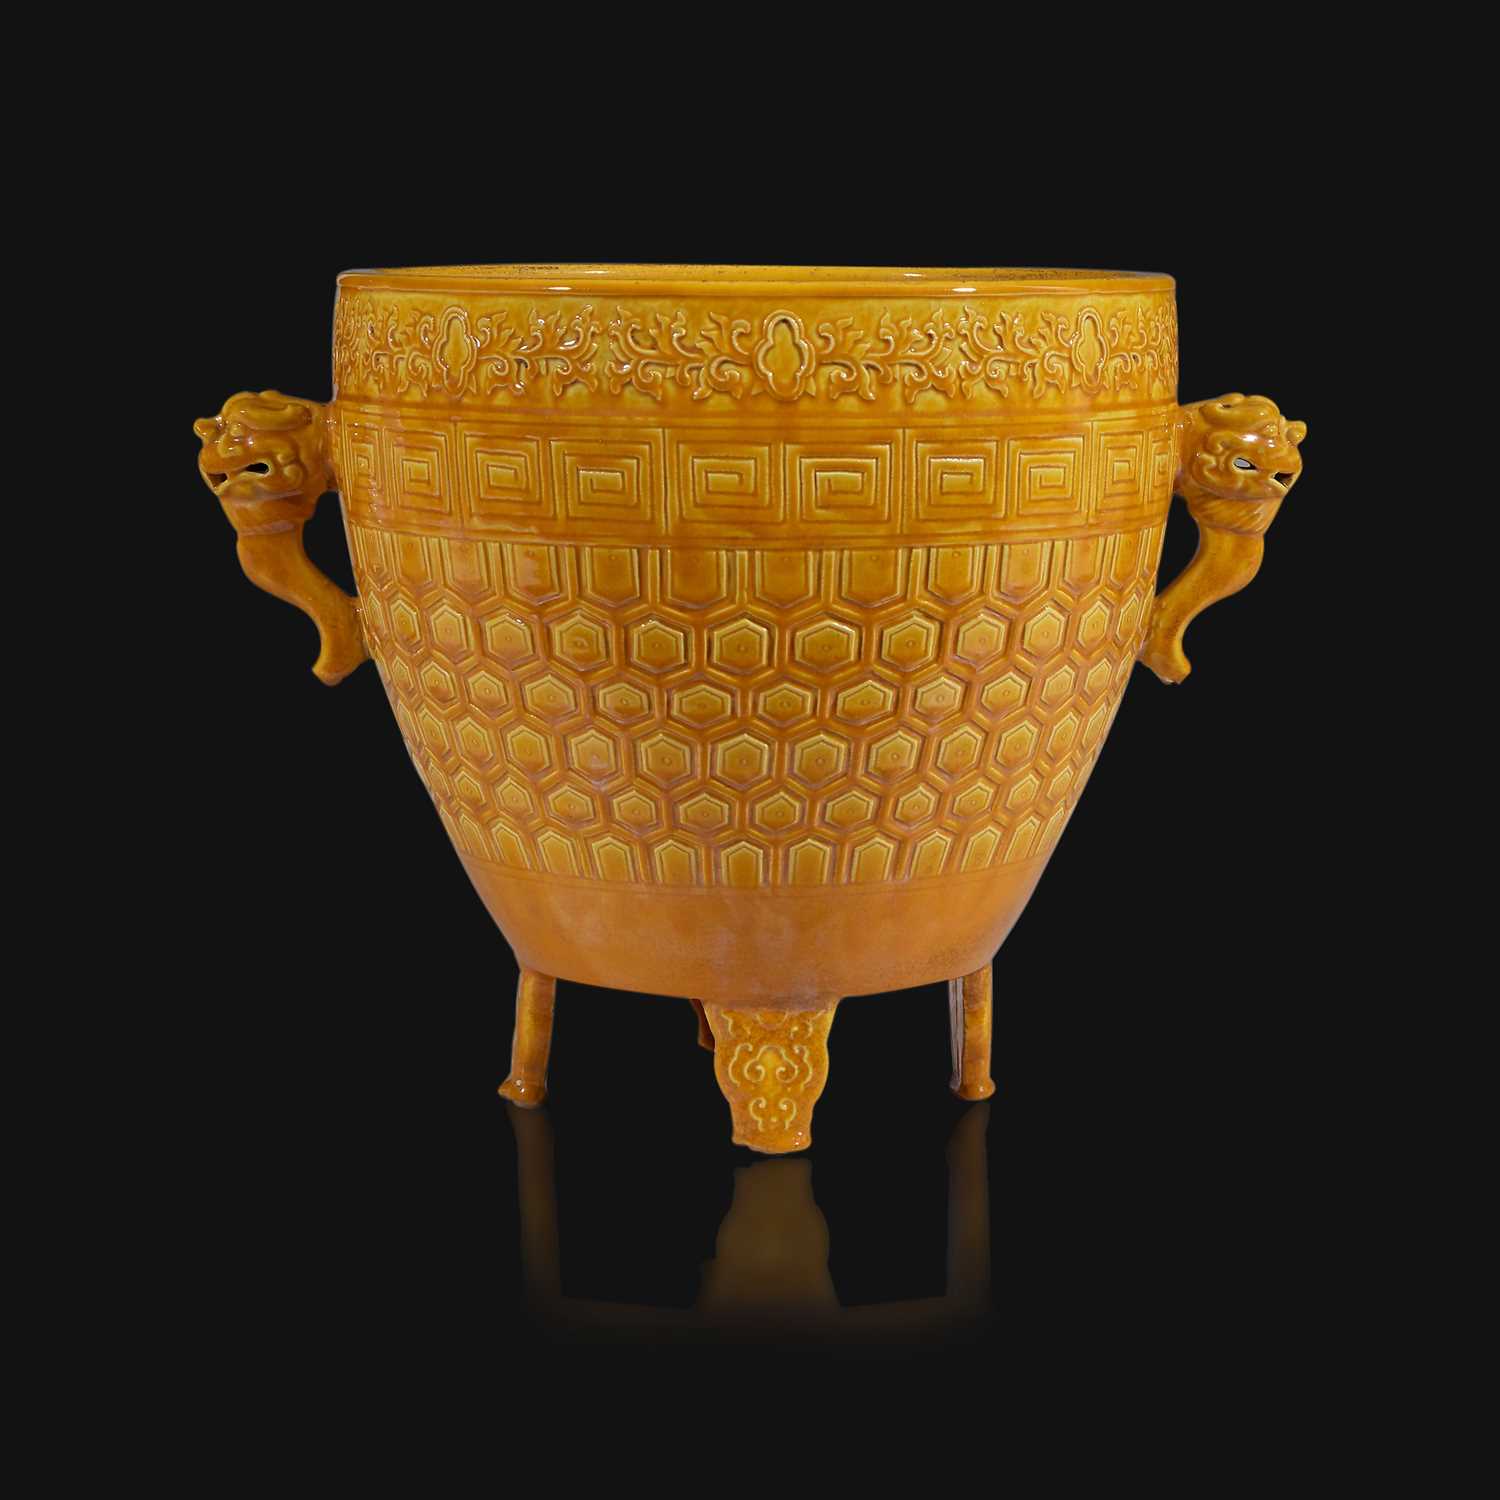 Lot 19 - A Chinese yellow-glazed archaistic vessel, Xing